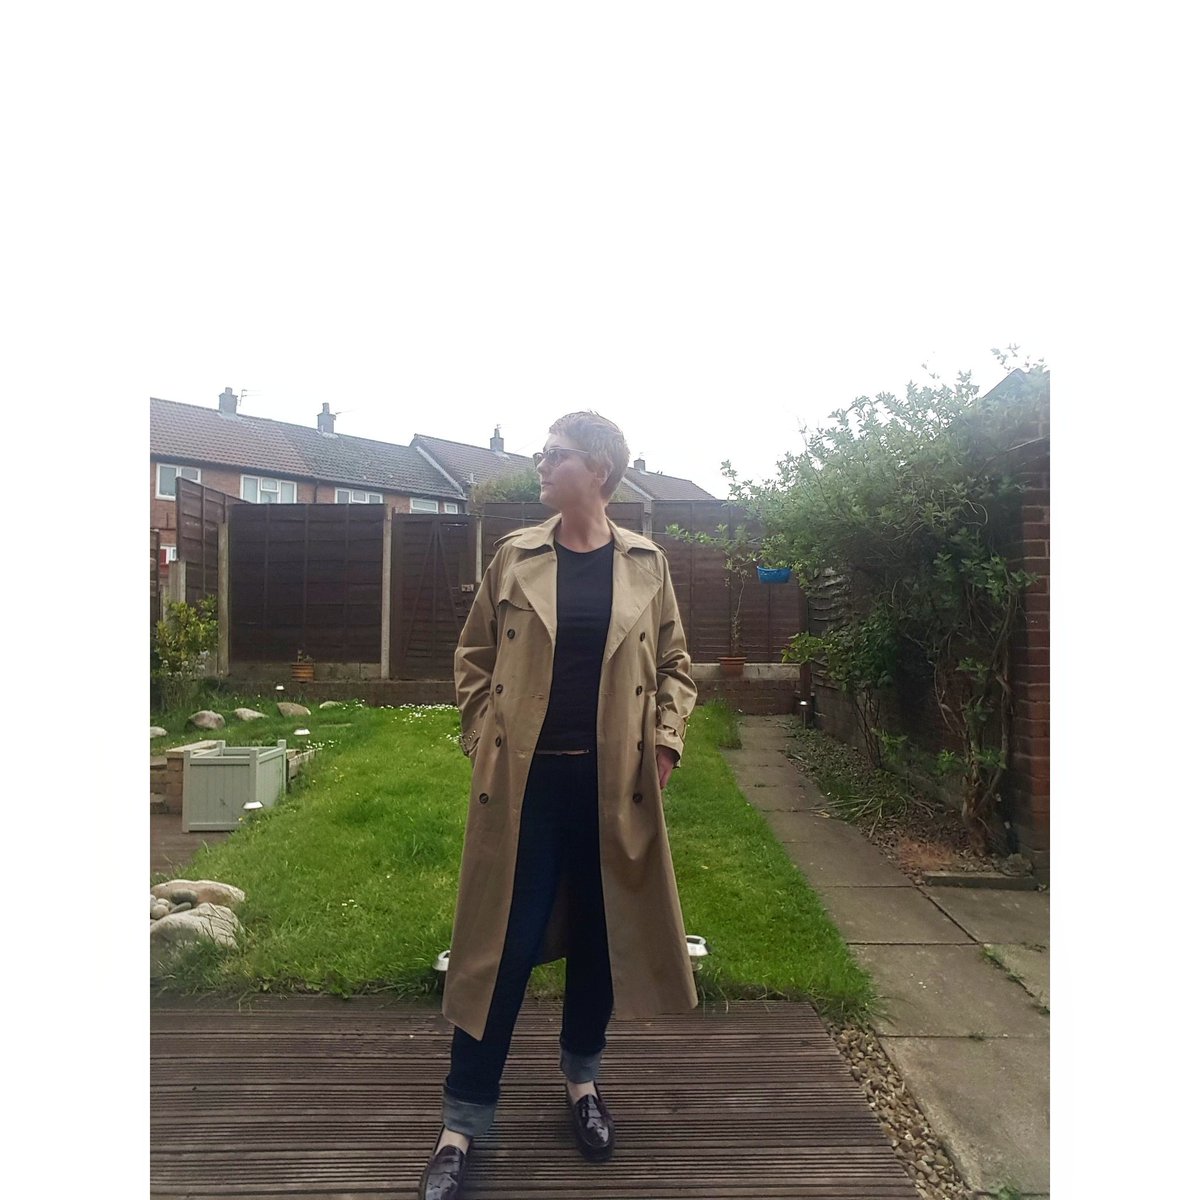 The best decision I made today is wearing a mac! 🌧🌧🌧
#styleinspo #styleinspiration #fashioninspo #fashioninspiration #fashioninyour40s #fashioninyour50s #keepingthestyleinyour40s #after40 #afterfortyblog #styleafter40 #ootd #oufitoftheday #womenintheir40s #stylish40s